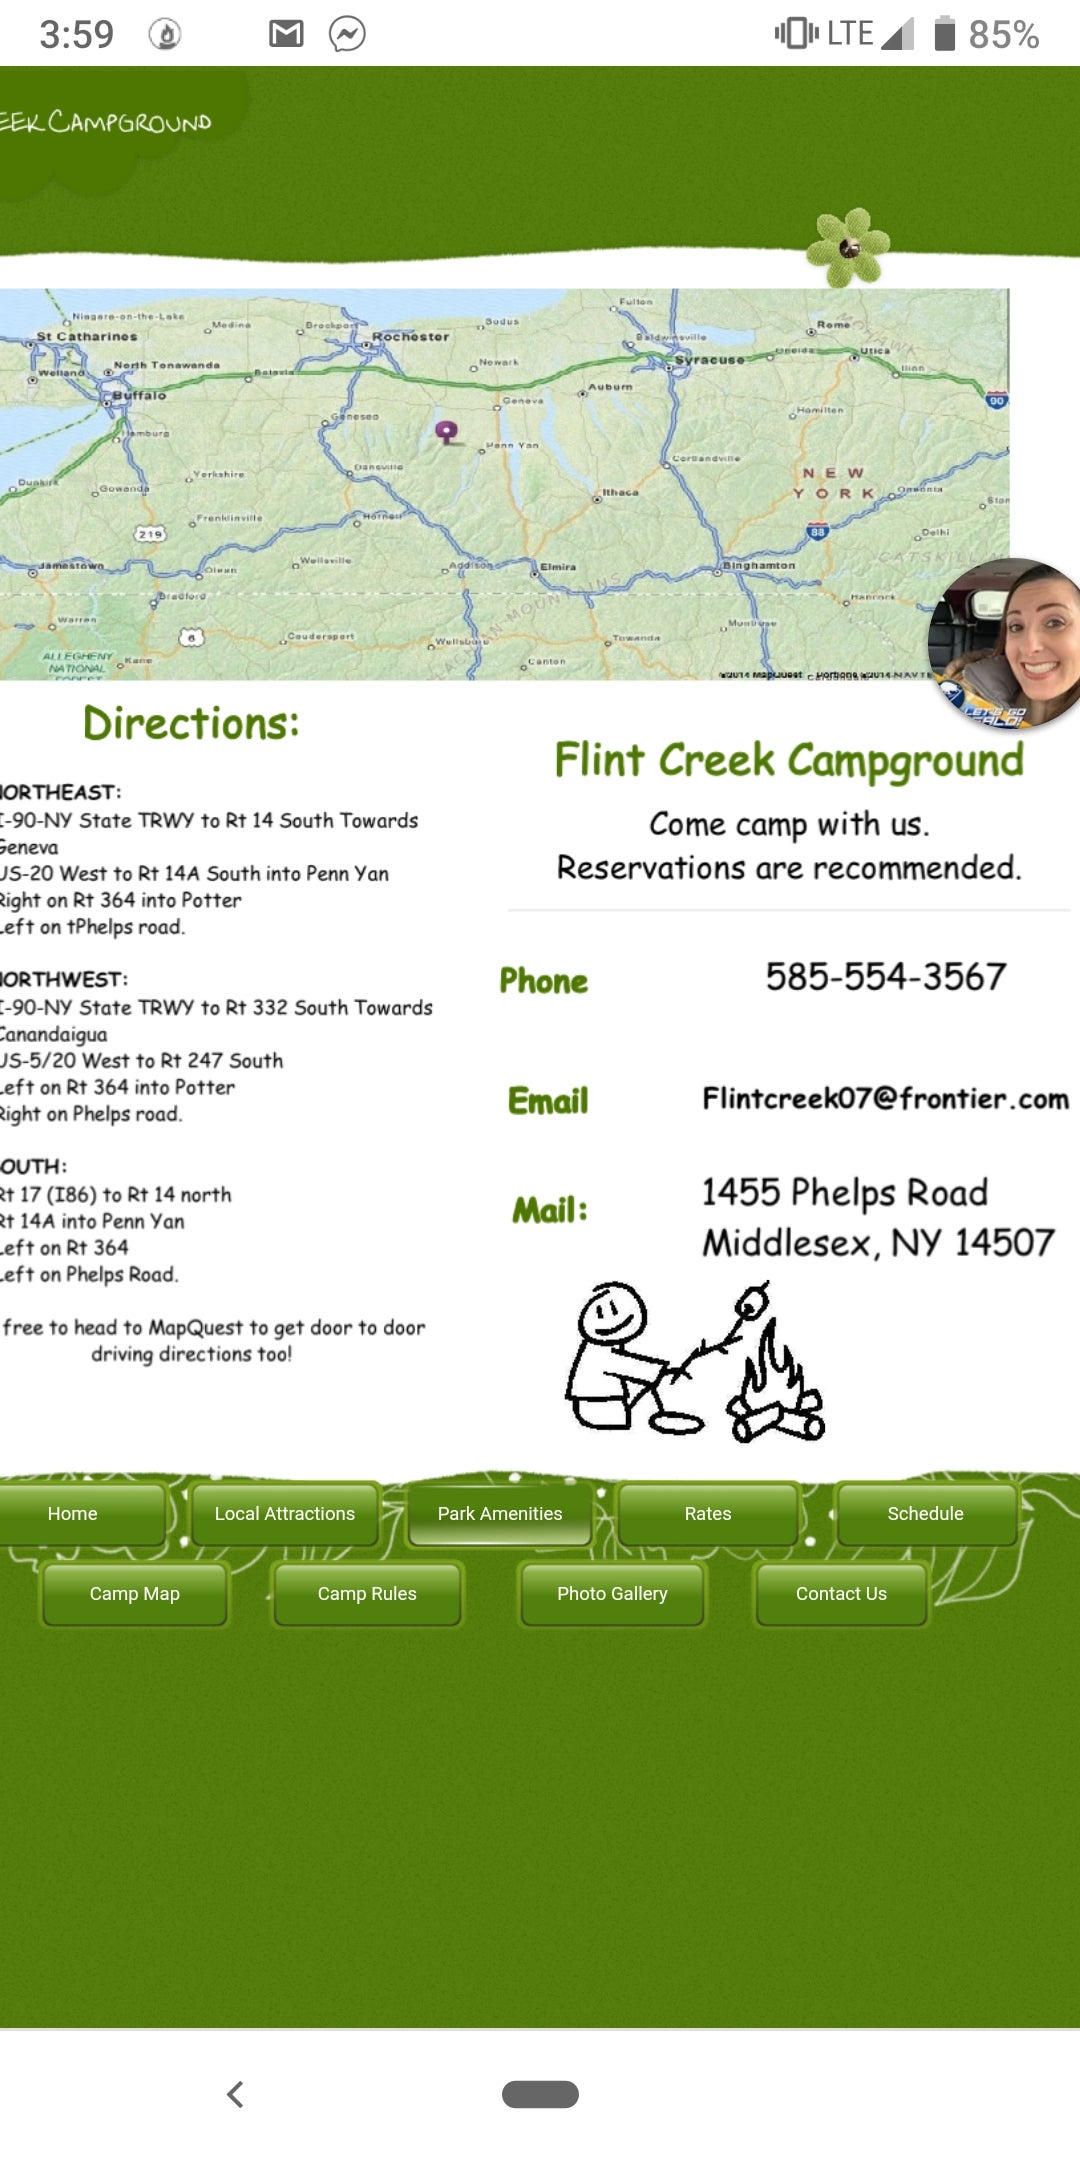 Camper submitted image from Flint Creek Campgrounds - 2